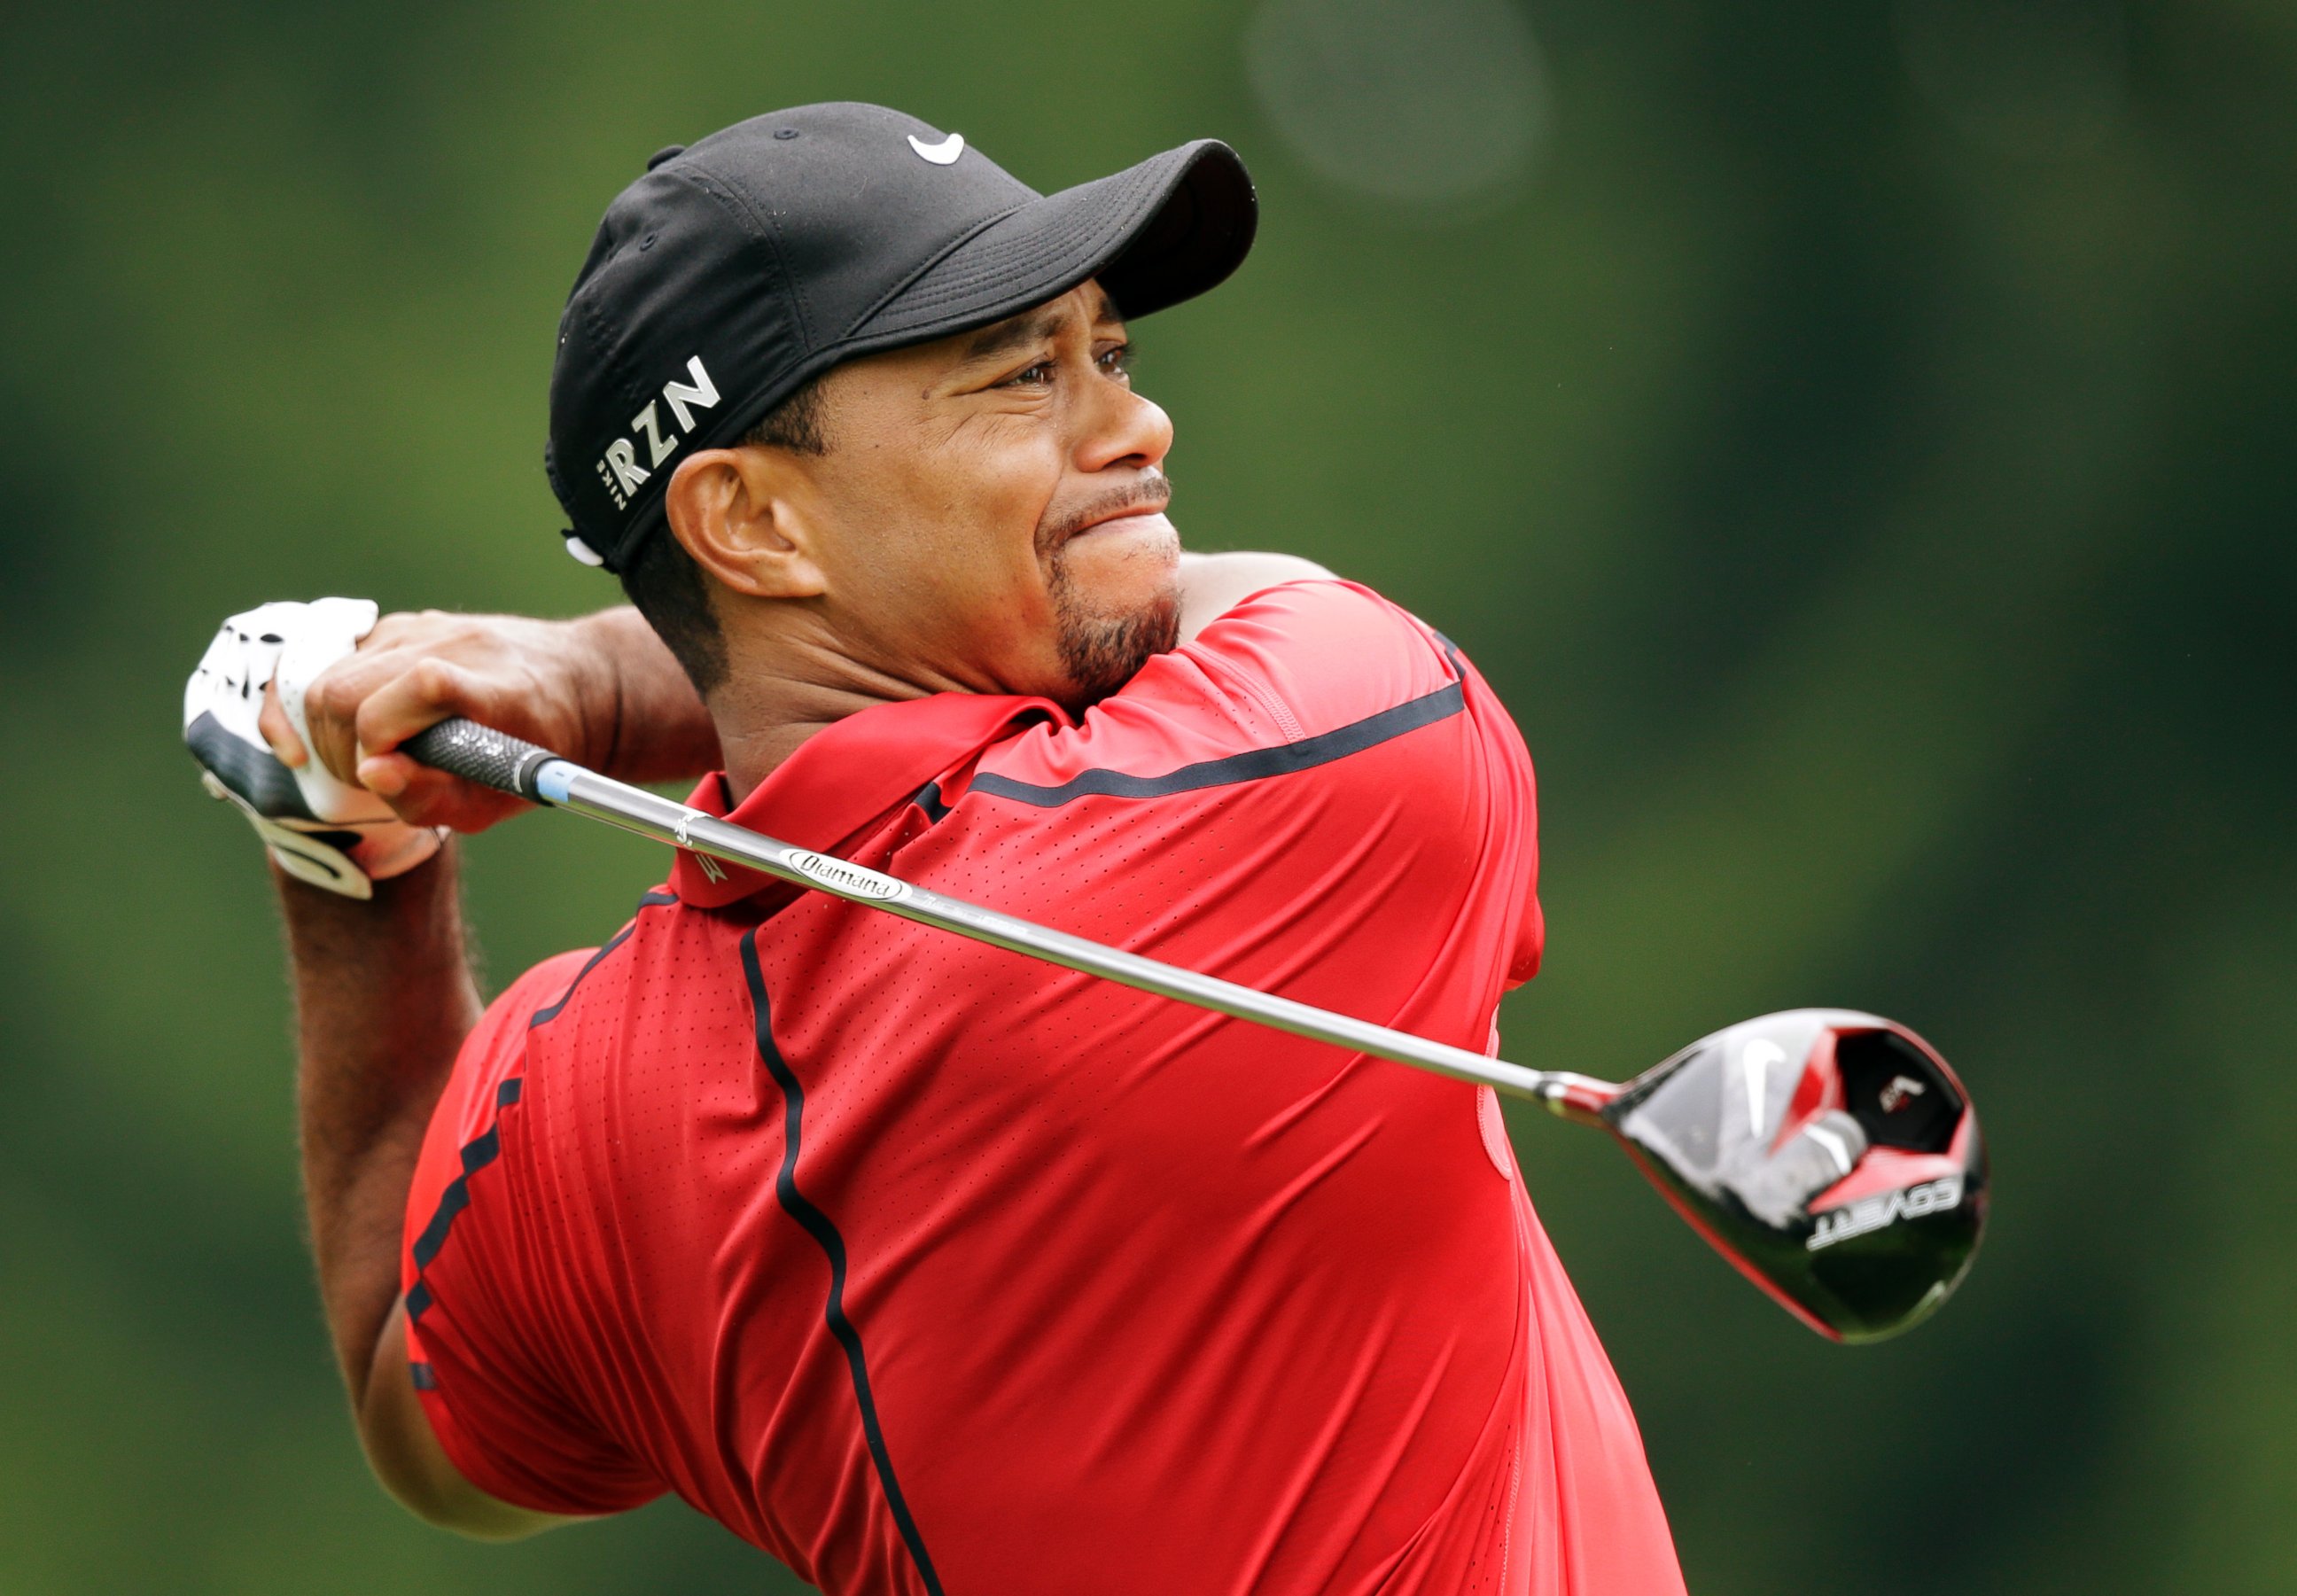 PHOTO: Tiger Woods watches his tee shot on the fourth hole during the final round of the Bridgestone Invitational golf tournament on Aug. 3, 2014, at Firestone Country Club in Akron, Ohio.